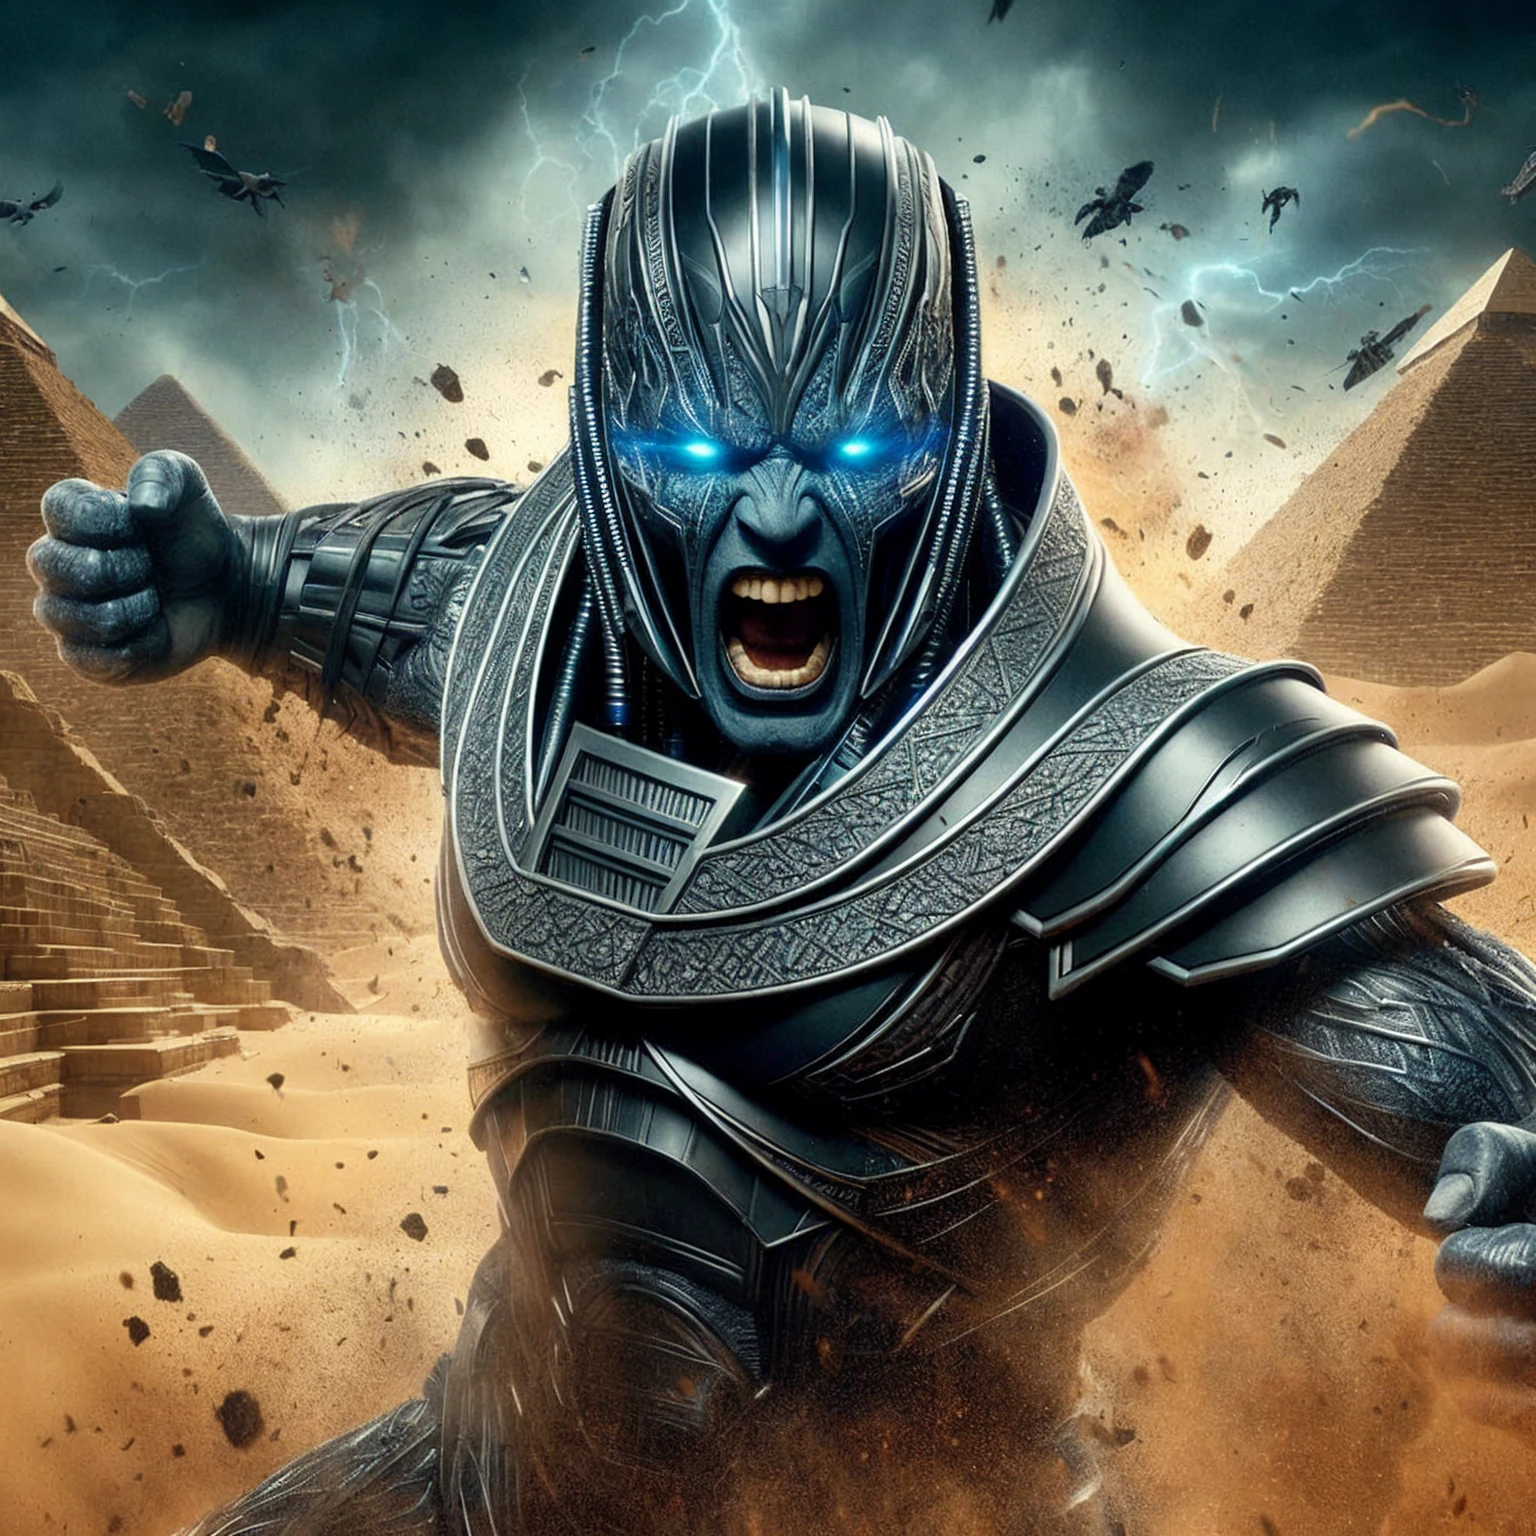 masterpiece, high quality, hyper detailed, intricade details,do the rock acting as xmen apocalypse,black lipstick, blue skin,apocalypse helmet,angry,furious,dynamic action,egyptian pyramid,technologic pyramid,desert,blue glowing eyes. super powerful,x-men mutant, on the movie set